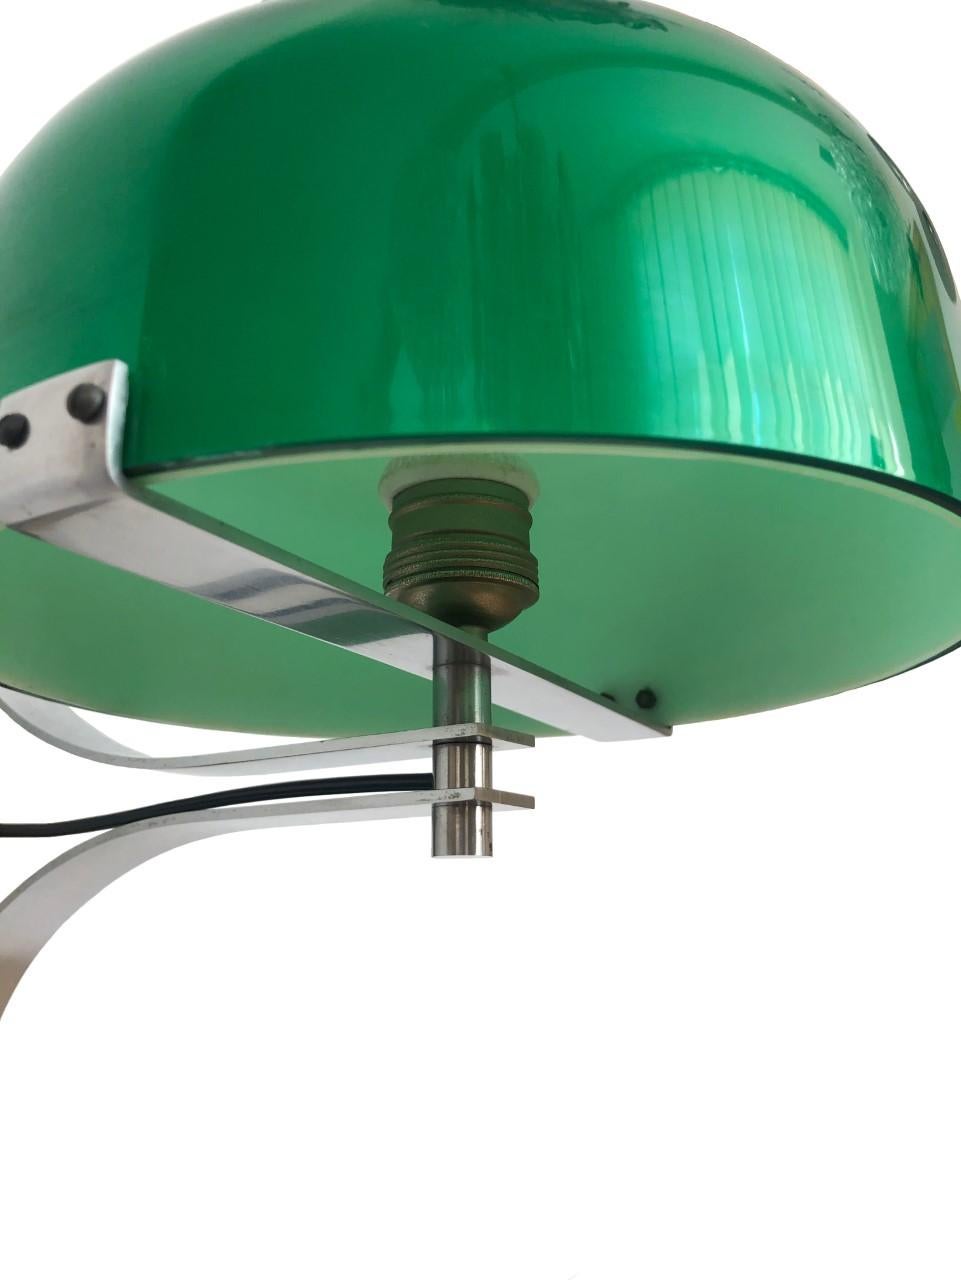 Unique and single Spanish green Lucite wall sconce by Miguel Milá.
This fixture is made in Barcelona (Spain) during 1970 by Tramo.
Miguel Milá Sagnier (Barcelona, ??1931) is a Spanish Industrial designer and interior designer. Founder of the